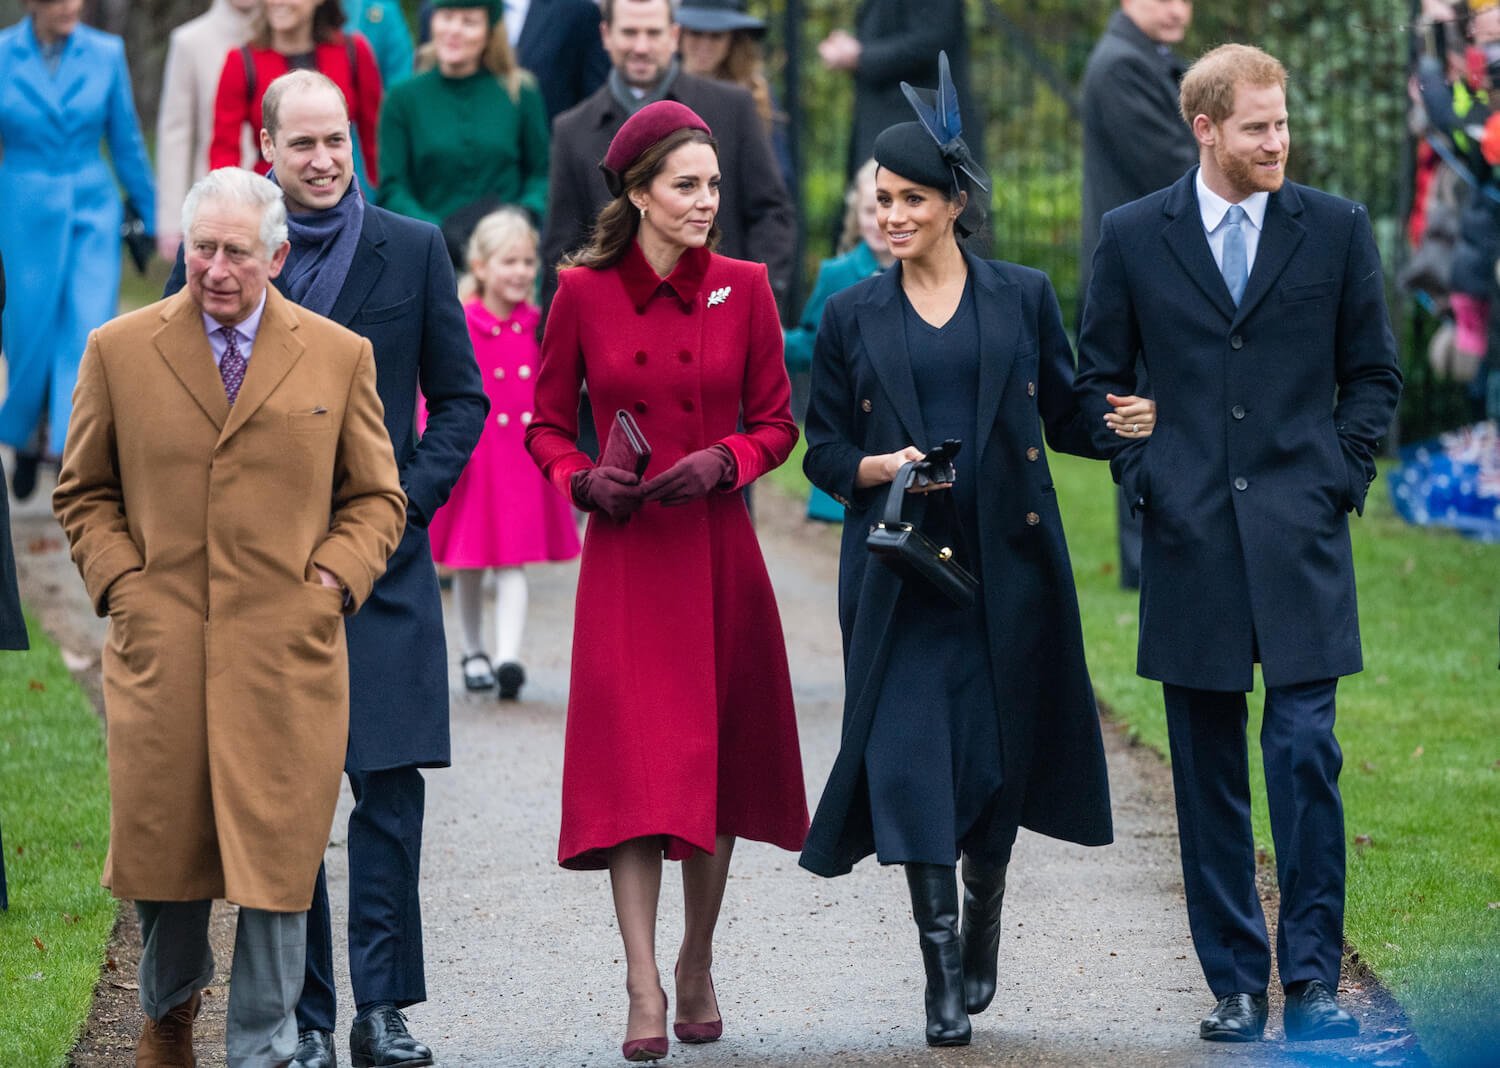 King Charles wears a brown coast while walking with Prince William, Kate Middleton and Meghan Markle walk and talk, and Prince Harry